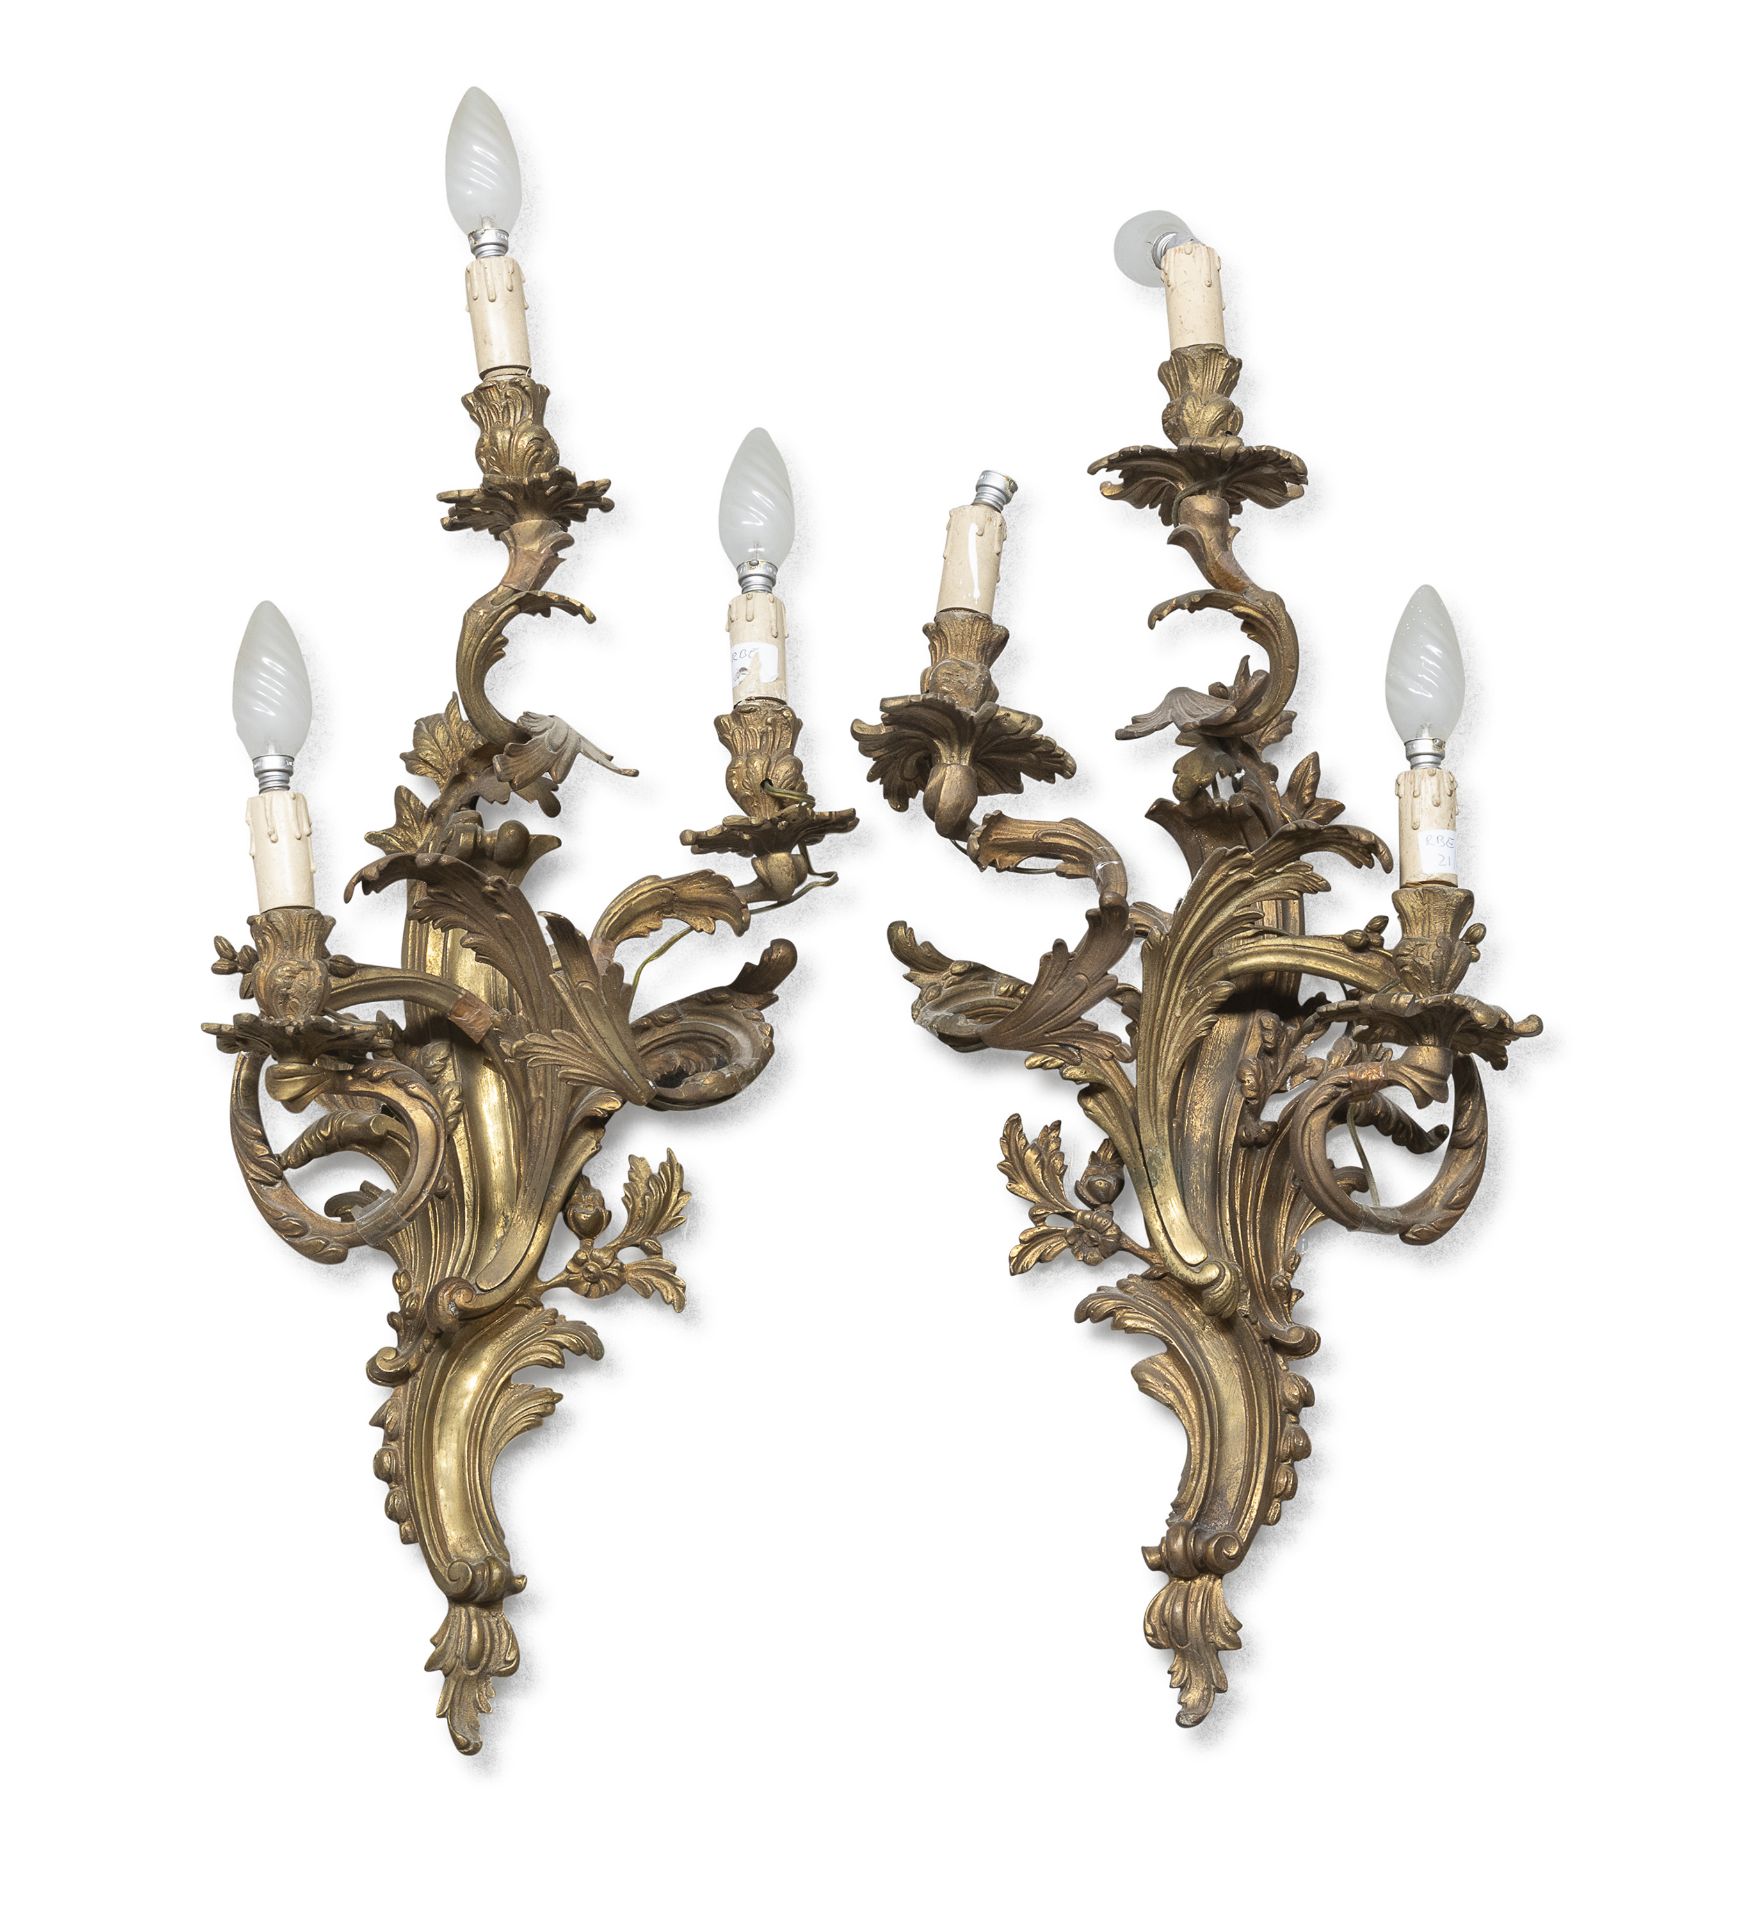 PAIR OF GOLDEN BRONZE WALL LAMPS 19TH CENTURY